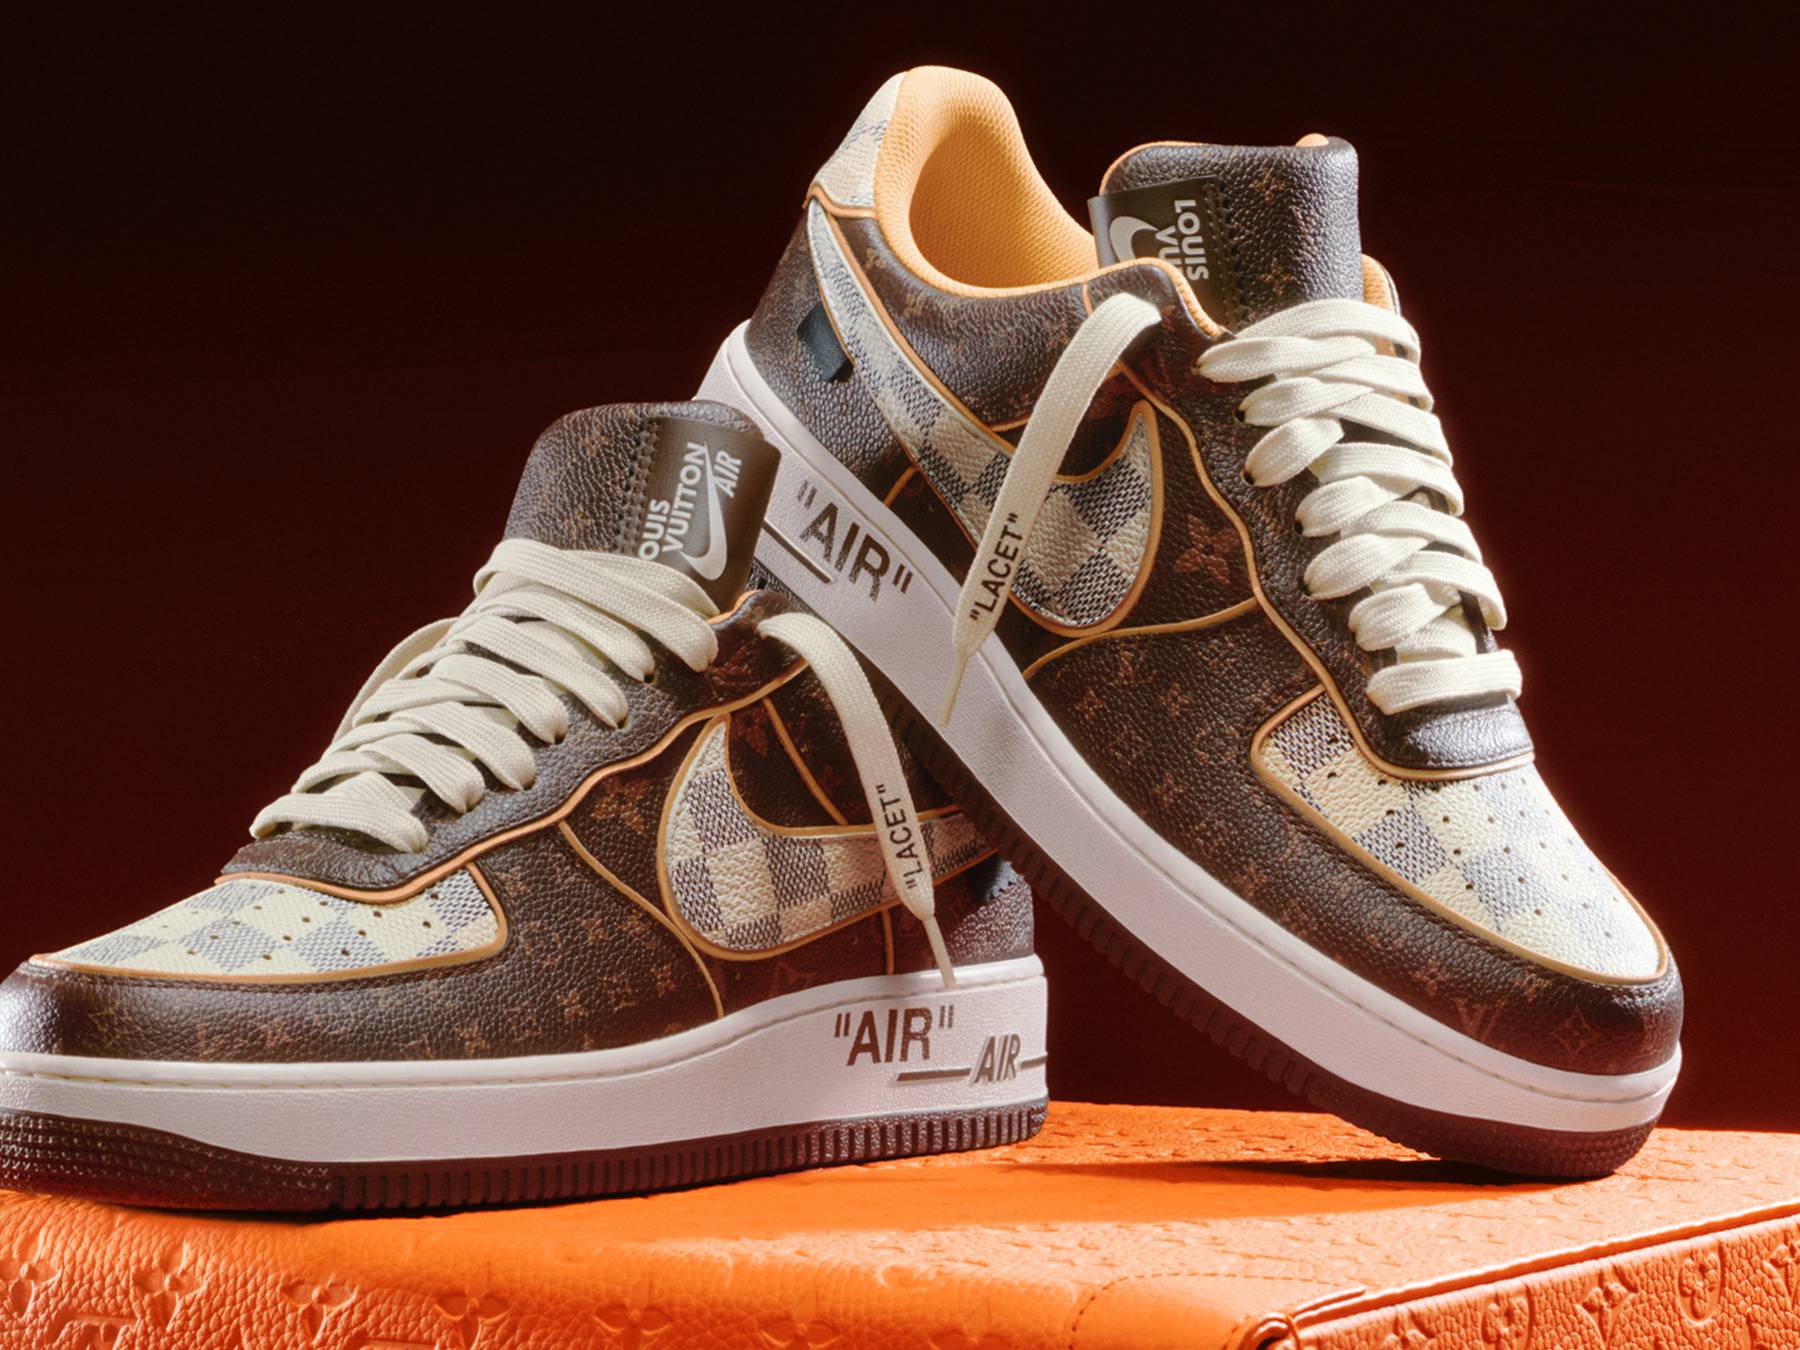 Sotheby's to Auction the 'Virgil Abloh x Futura Laboratories